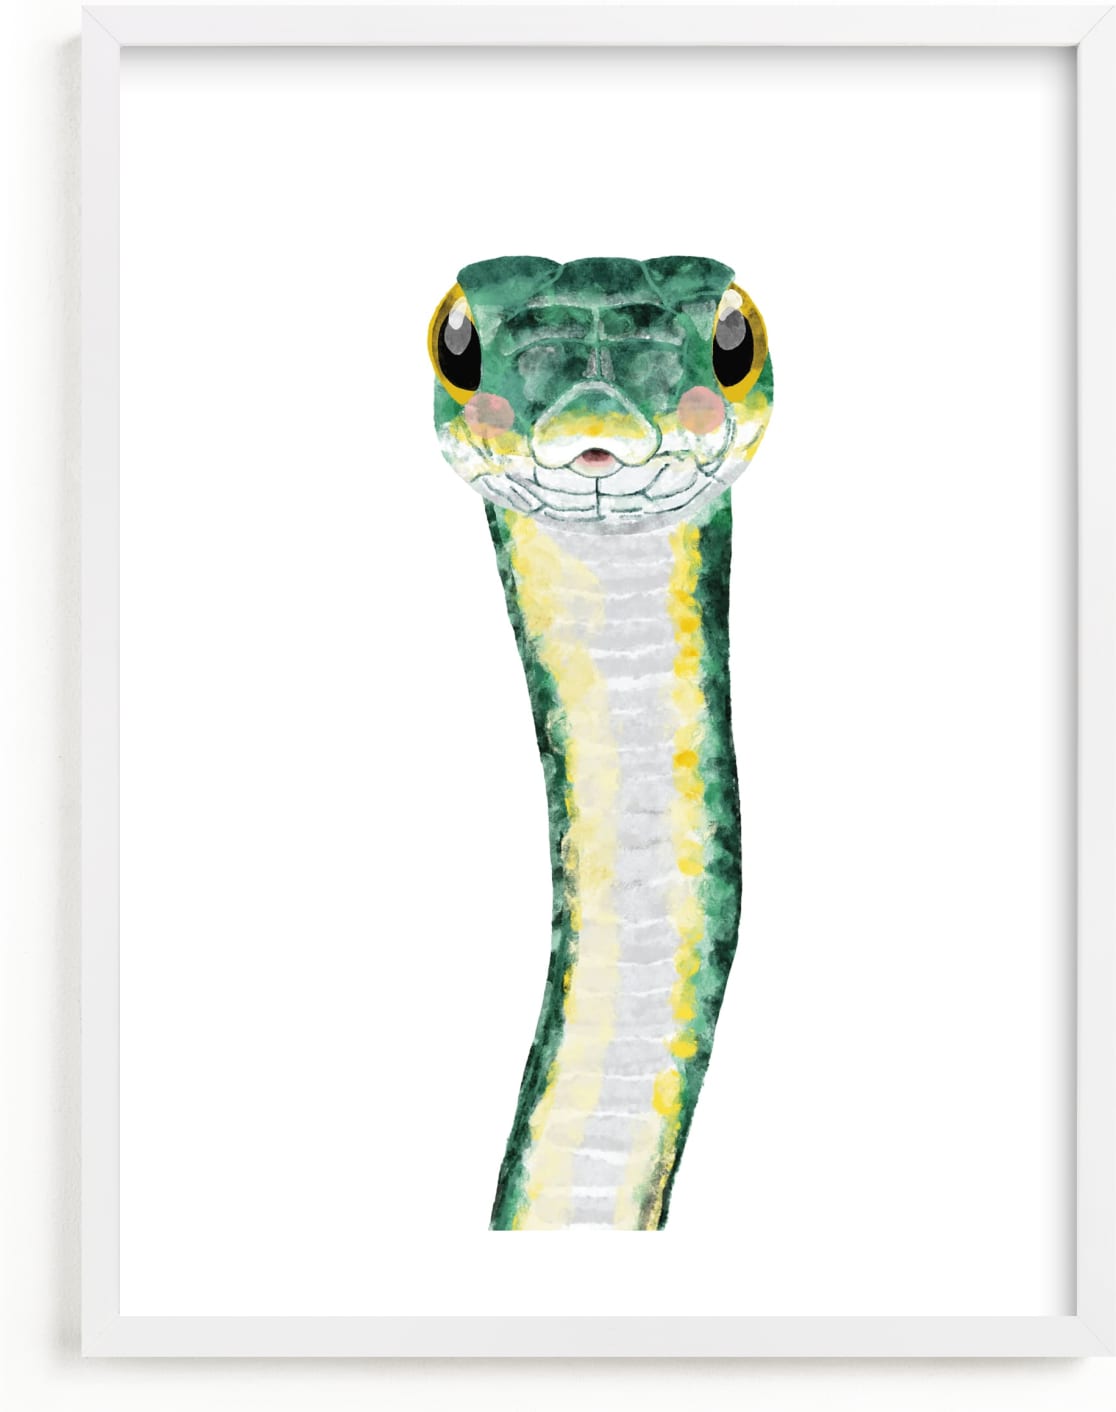 This is a yellow, green art by Cass Loh called Baby Animal Snake.